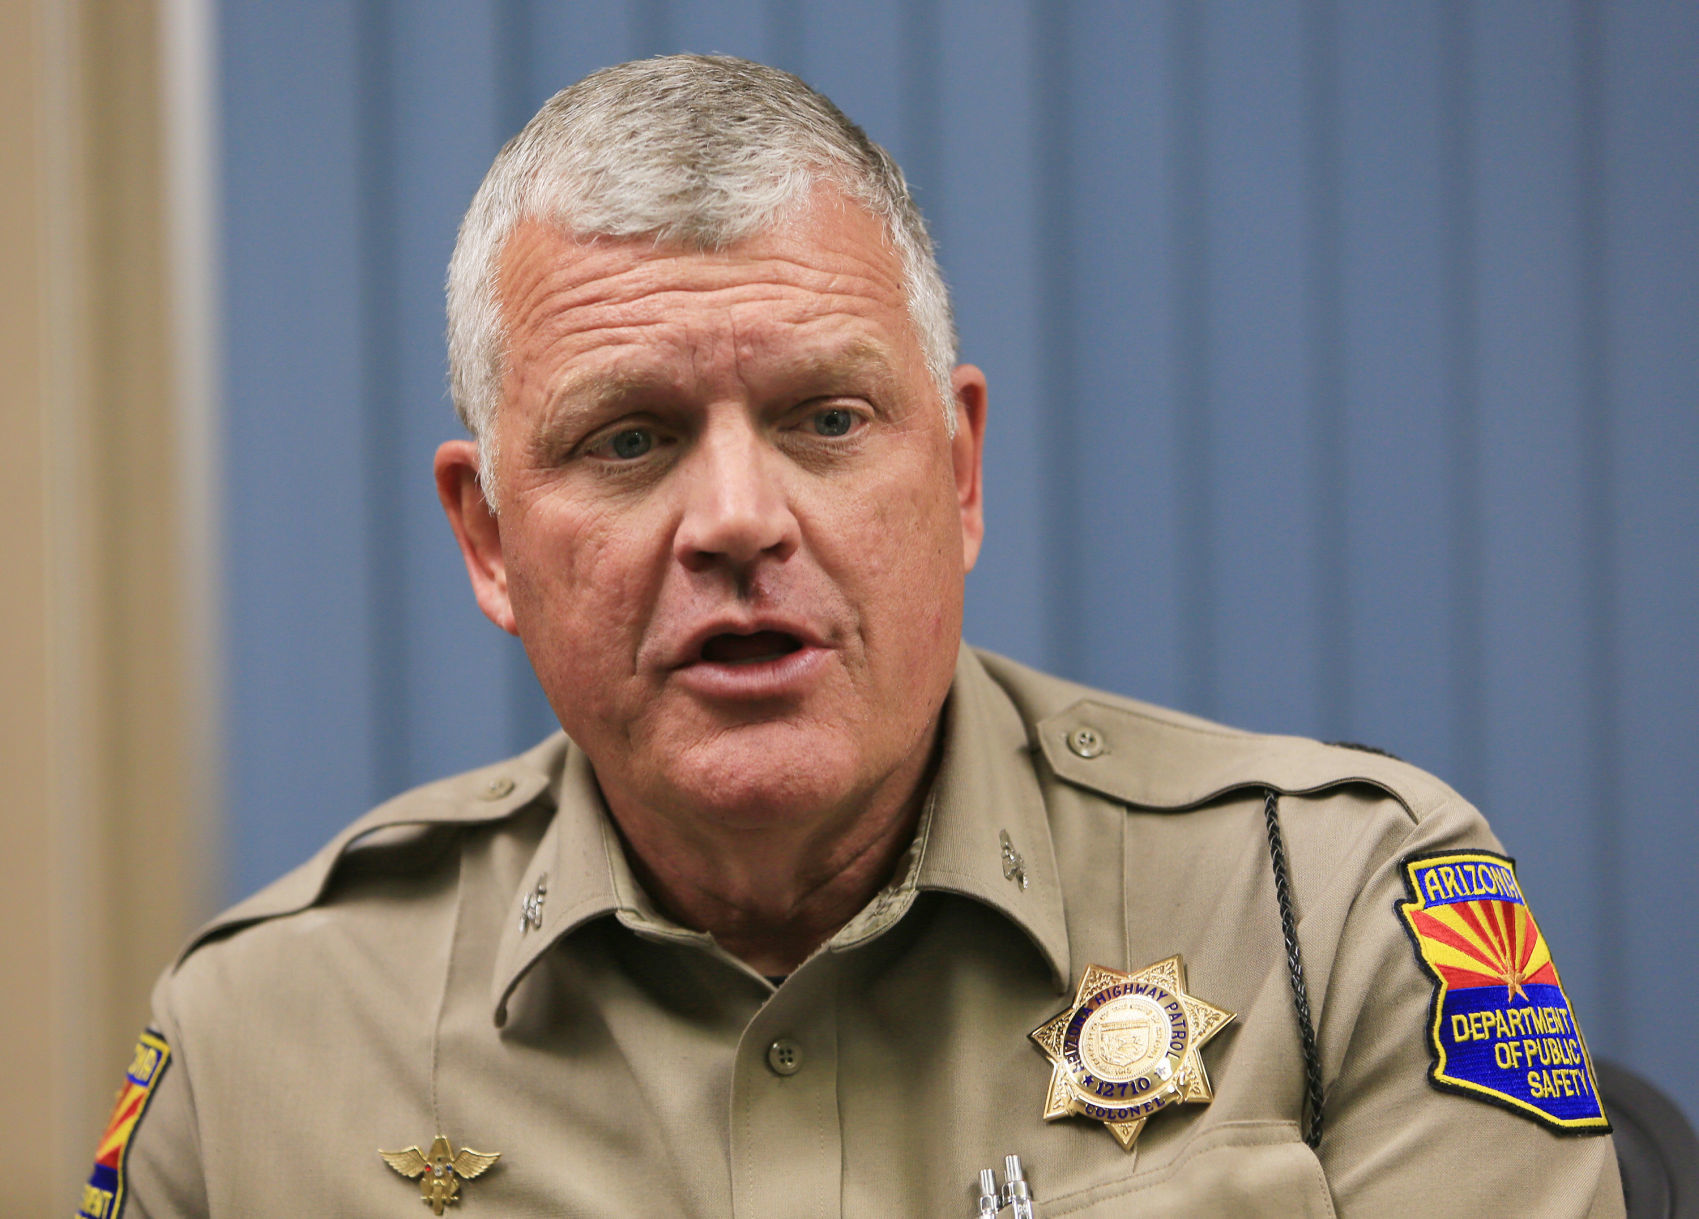 Tim Steller's opinion: DPS director loses authority after traffic stop